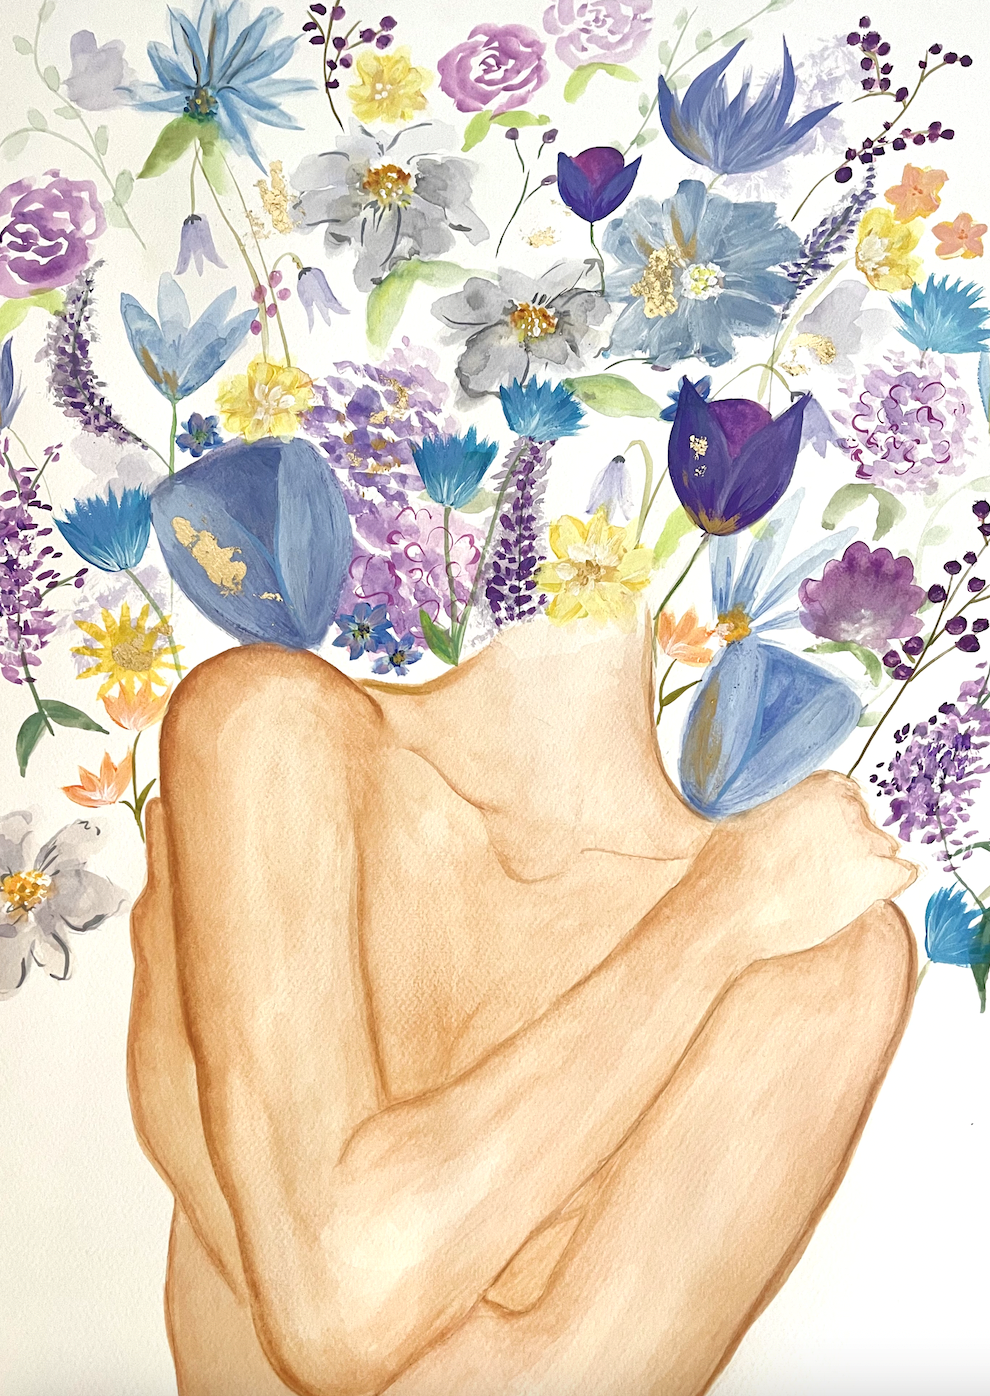 An artistic watercolor painting juxtaposing the delicate beauty of various flowers with the gentle curves of a human back.